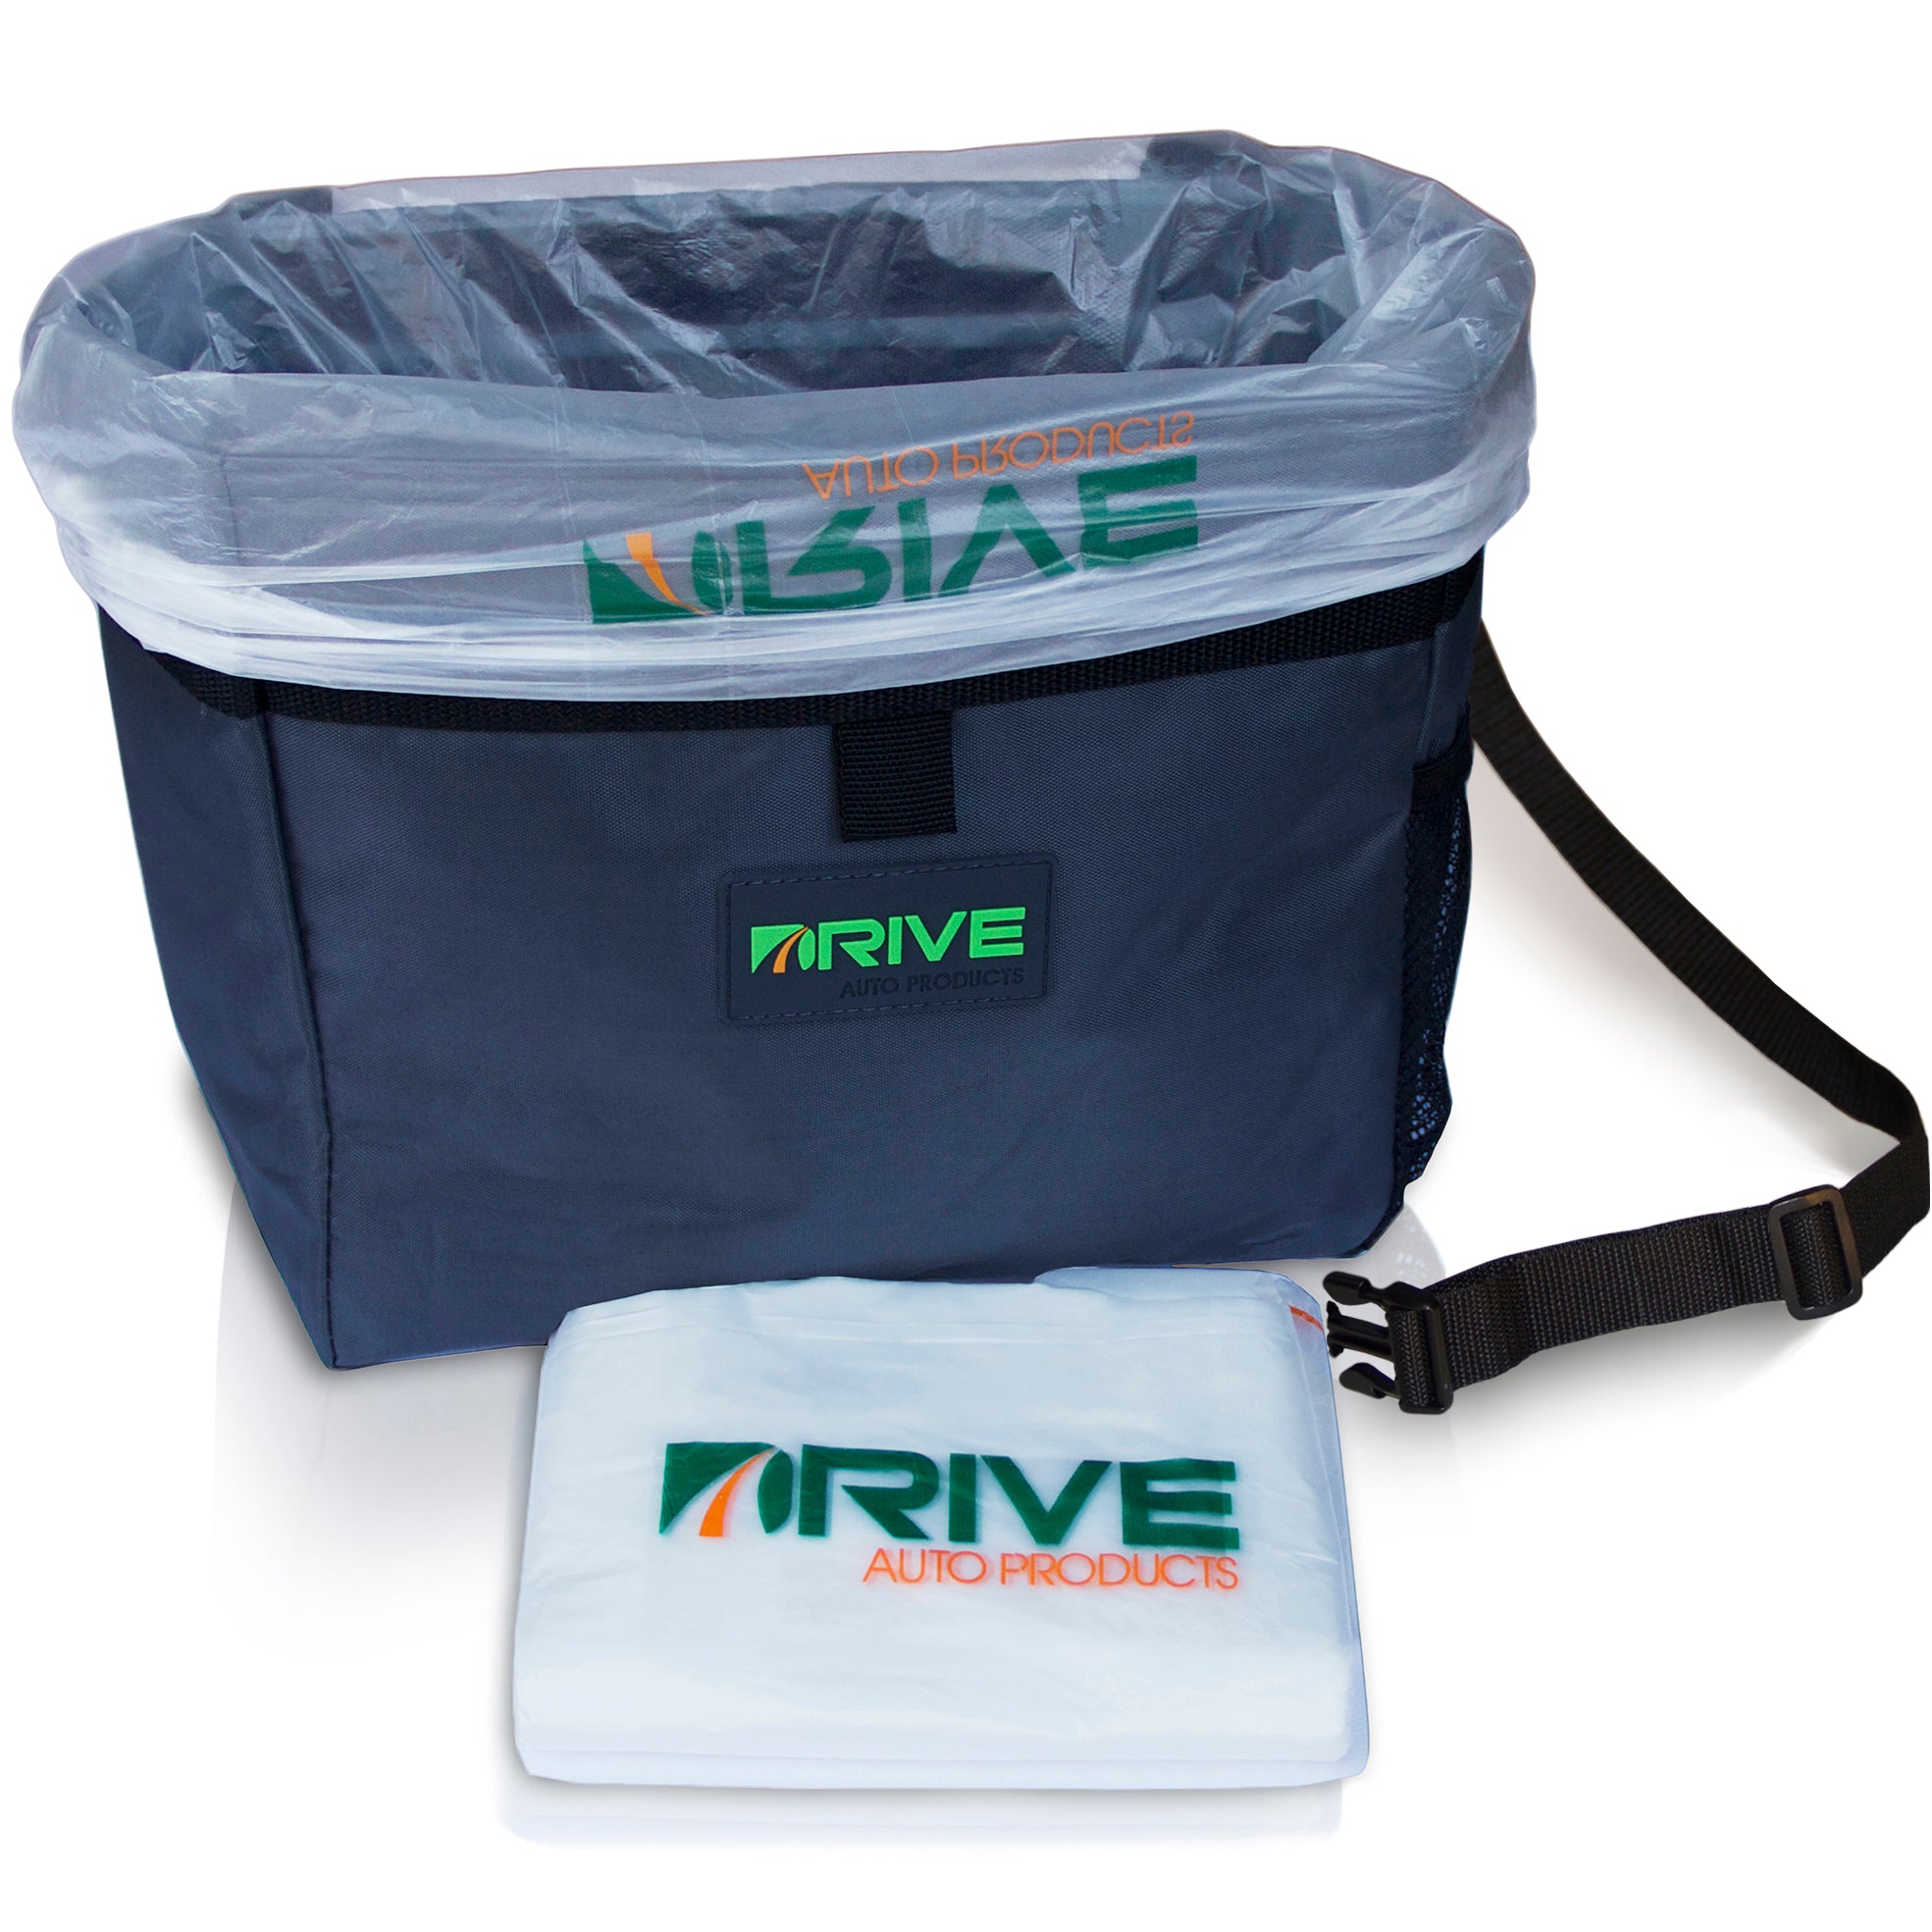 Aktiver gnist Aktiv Car Garbage Can | Car Trash Can with Straps | DRIVE Auto Products